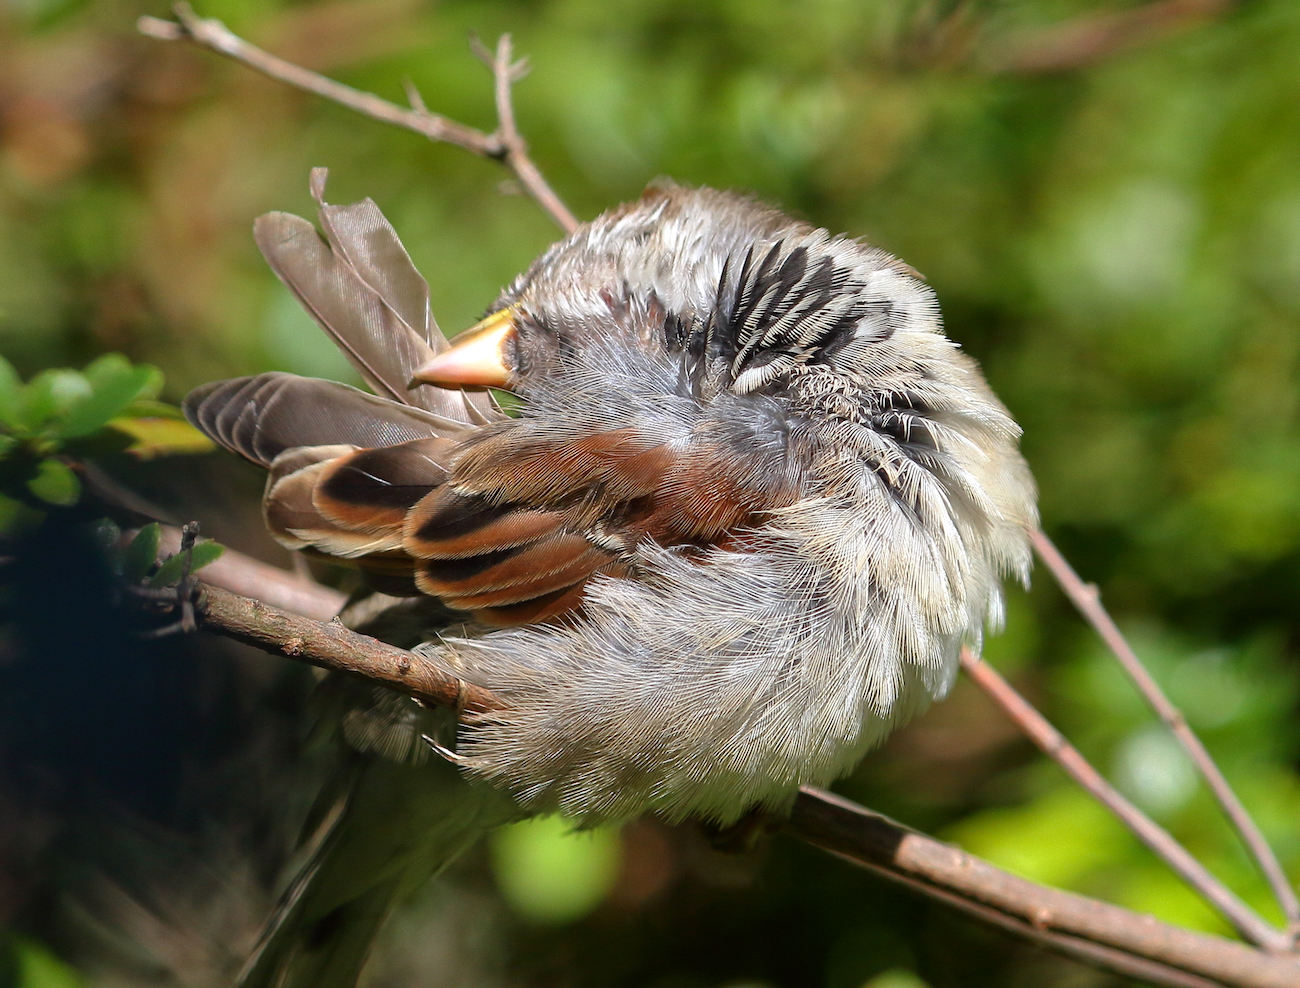 Sparrow preening wing feathers